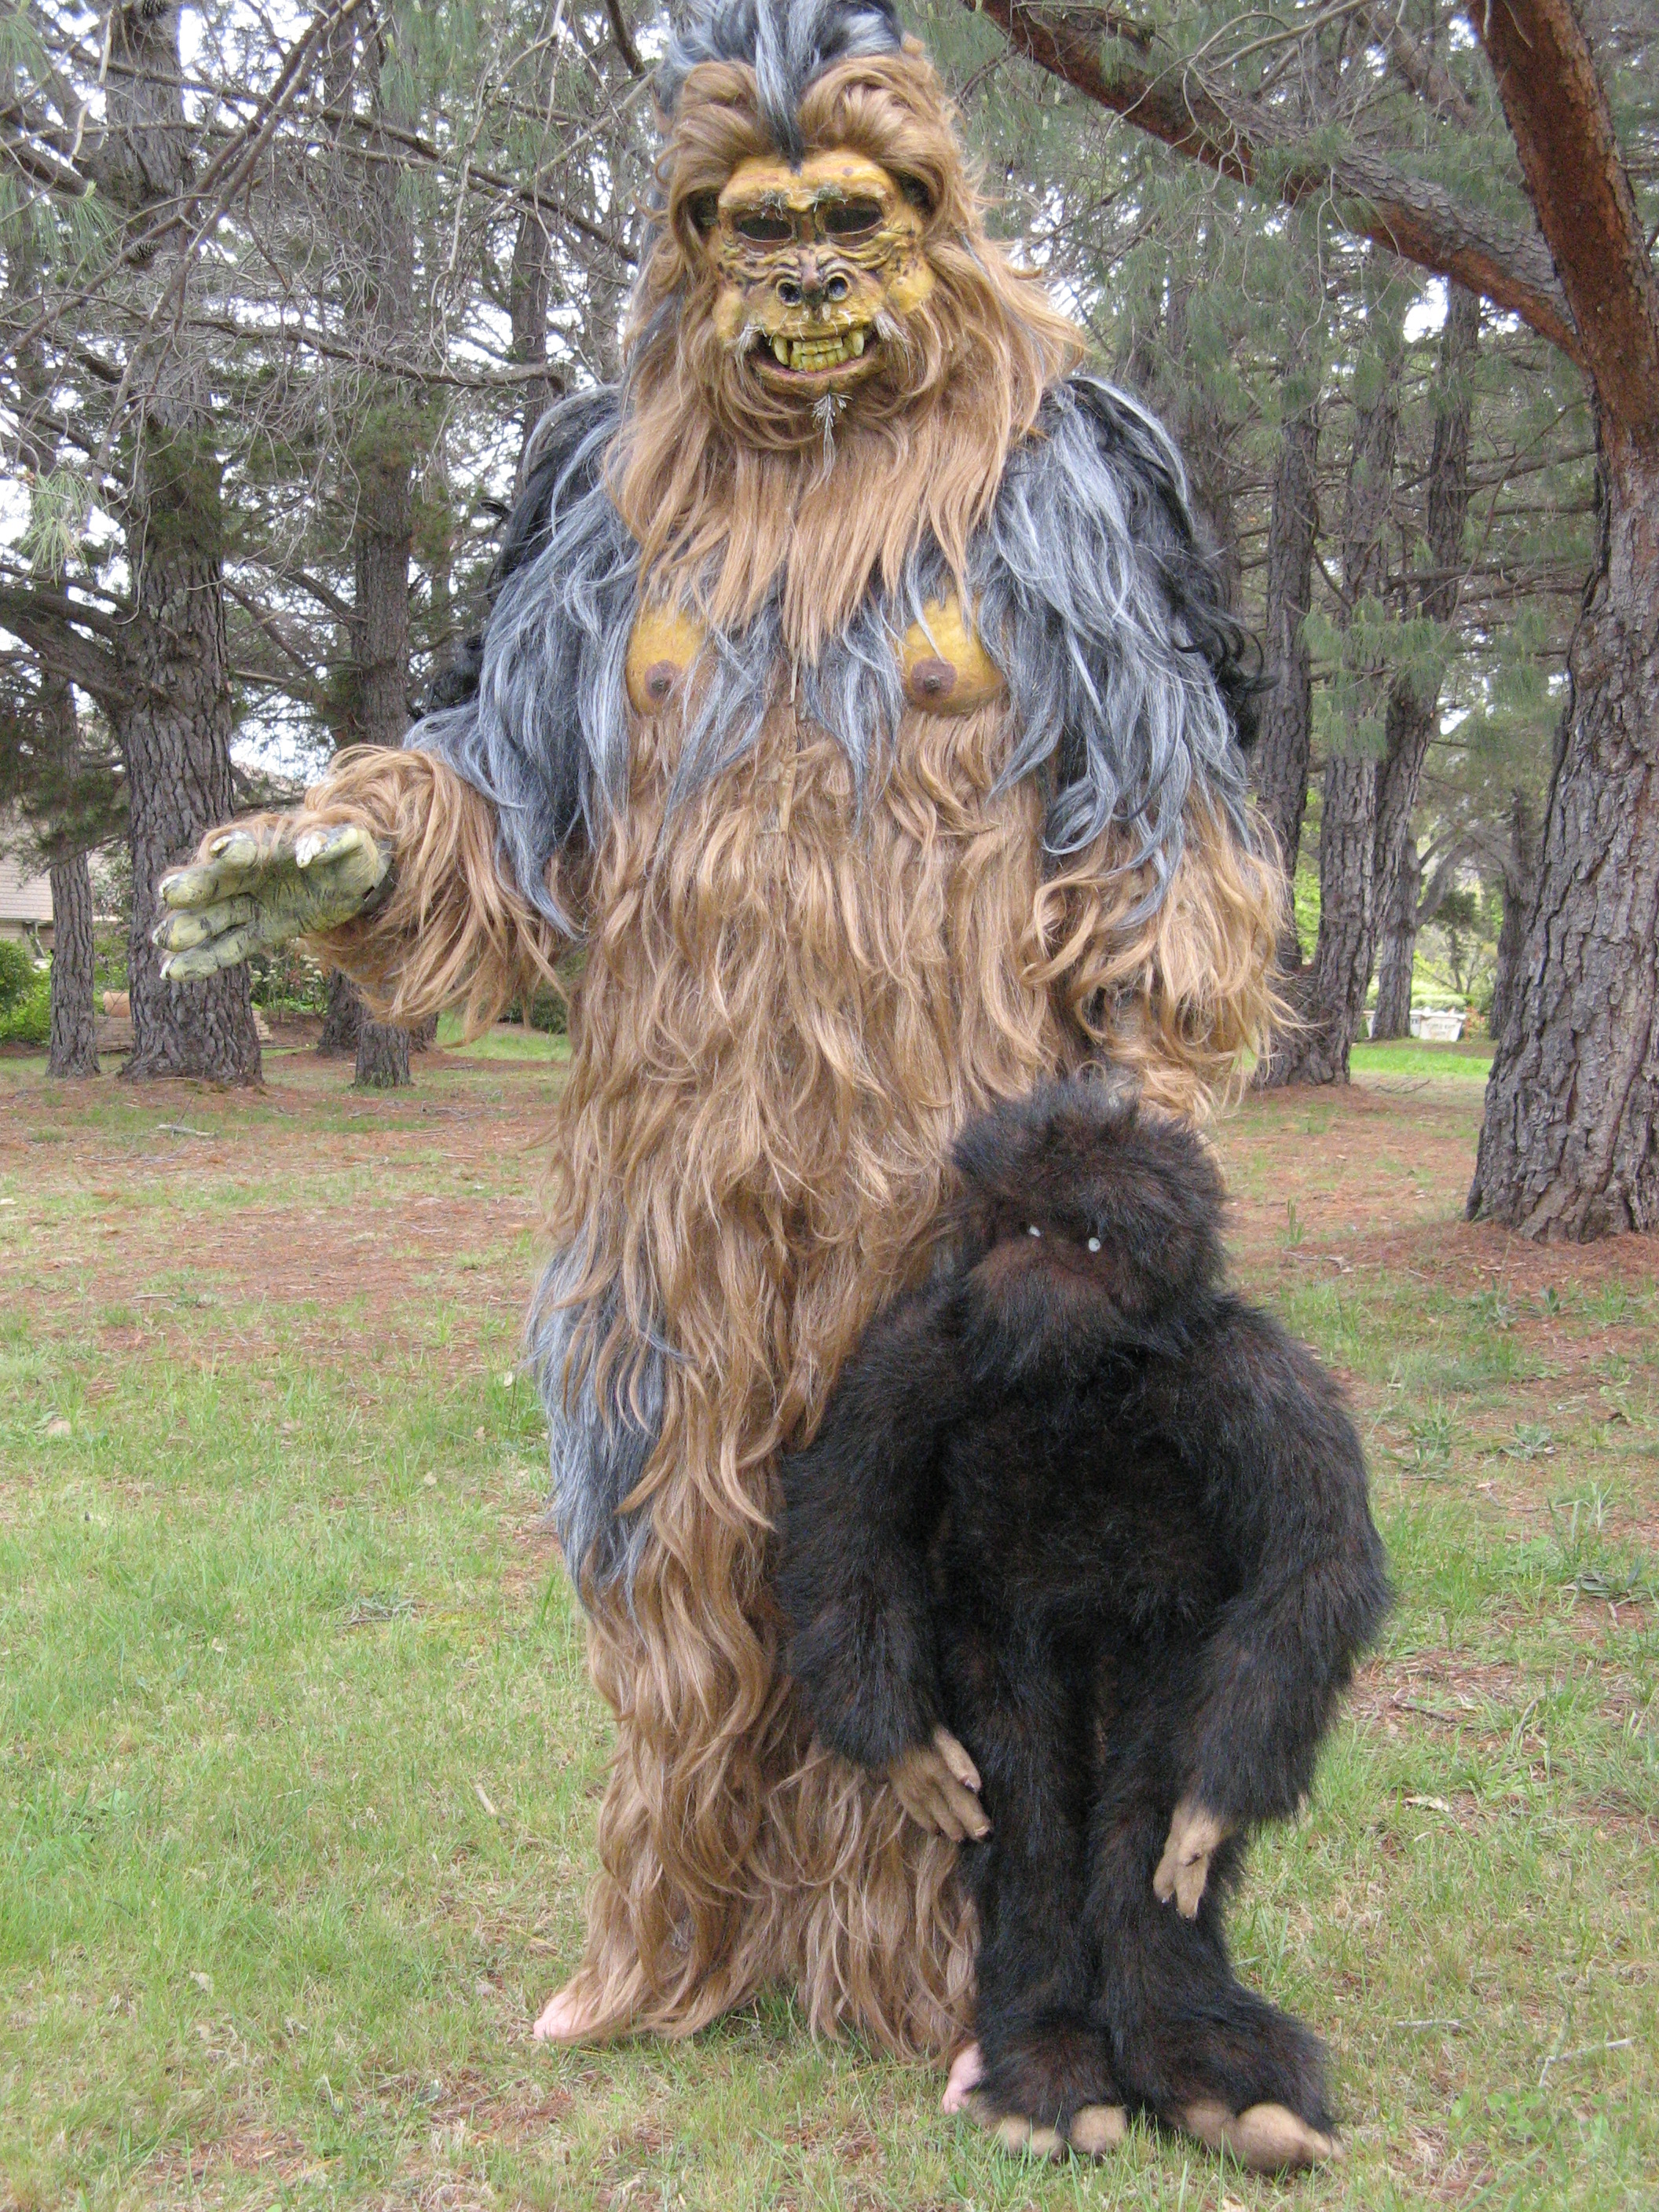 Yowie and child